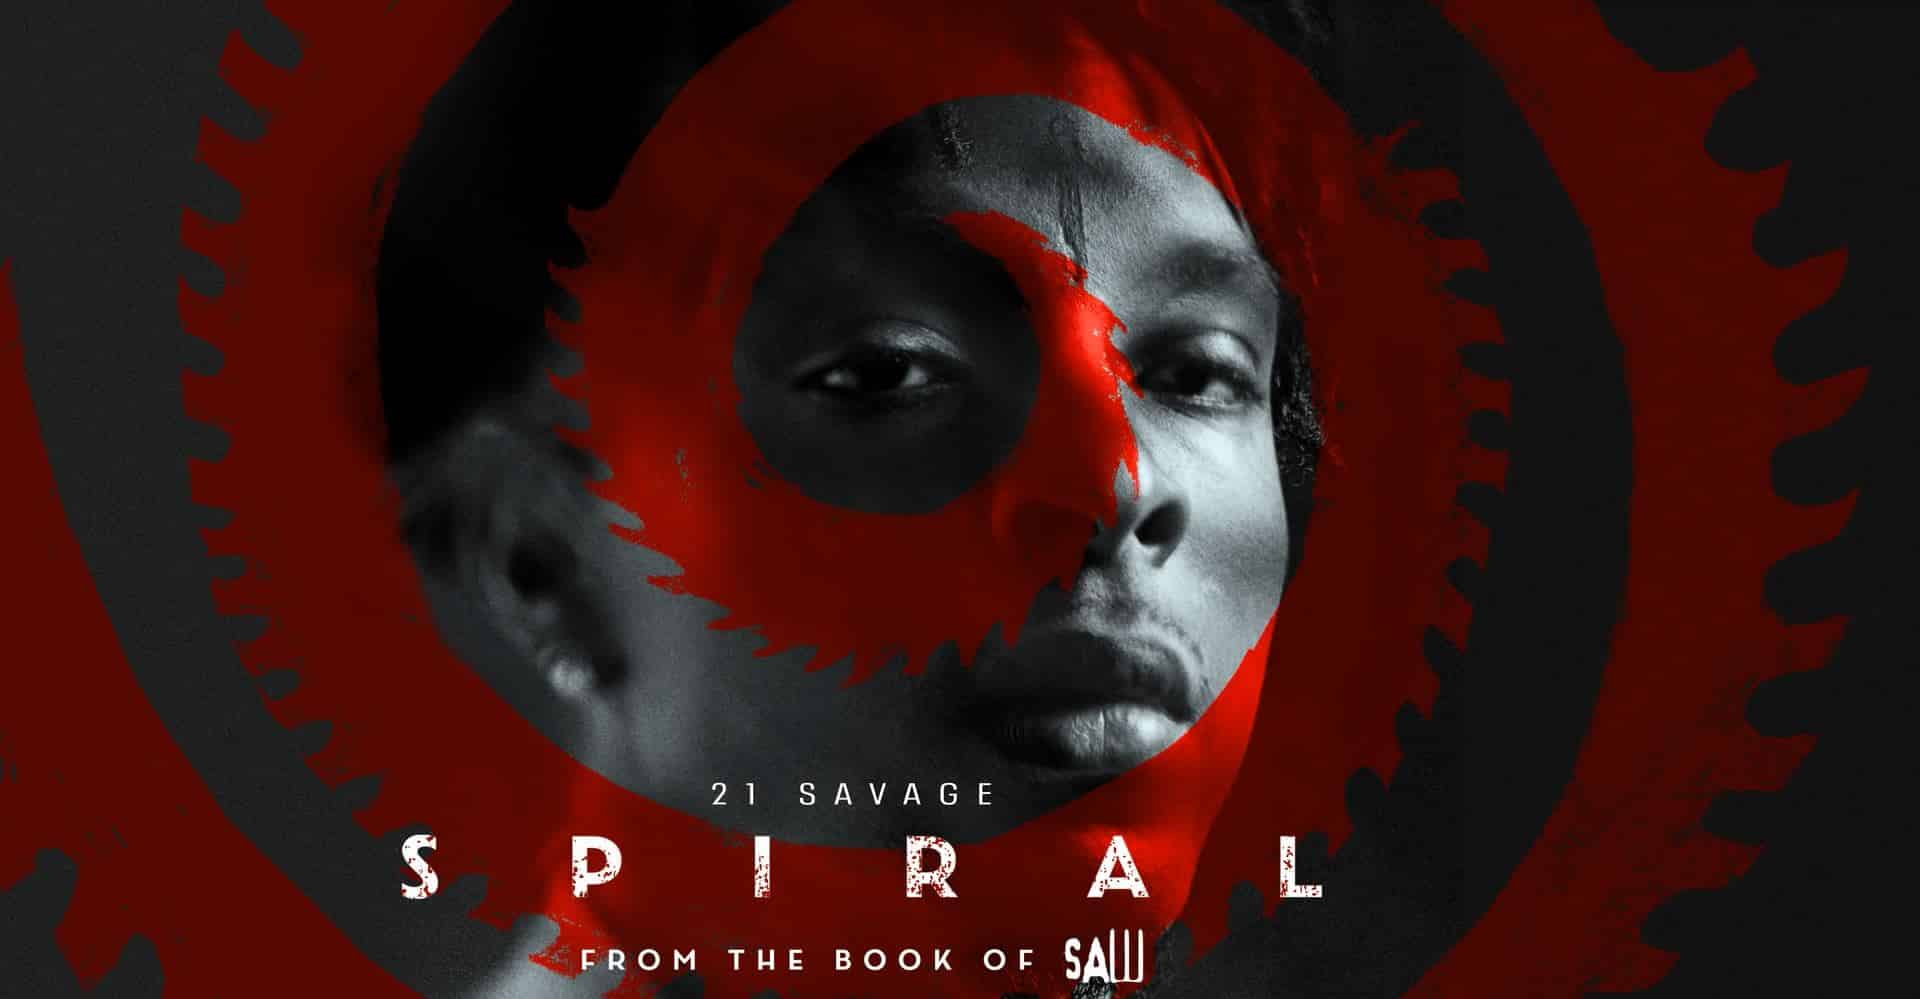 See your hello. 21 Savage Spiral. 21 Savage Spiral обложка. 21 Savage Spiral from the book of saw Soundtrack.